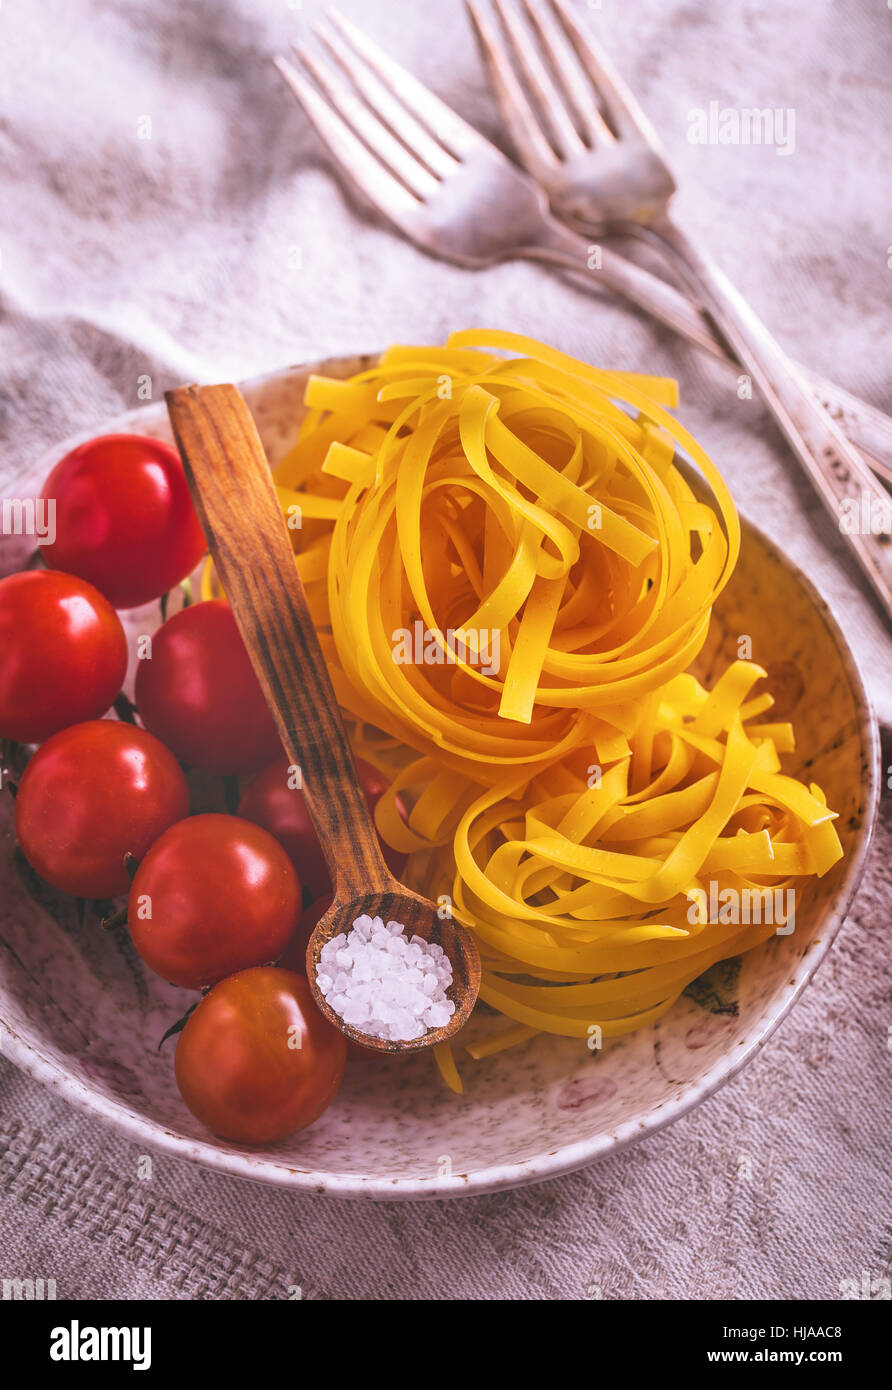 Uncooked tagliatelle pasta with cherry tomatoes Stock Photo